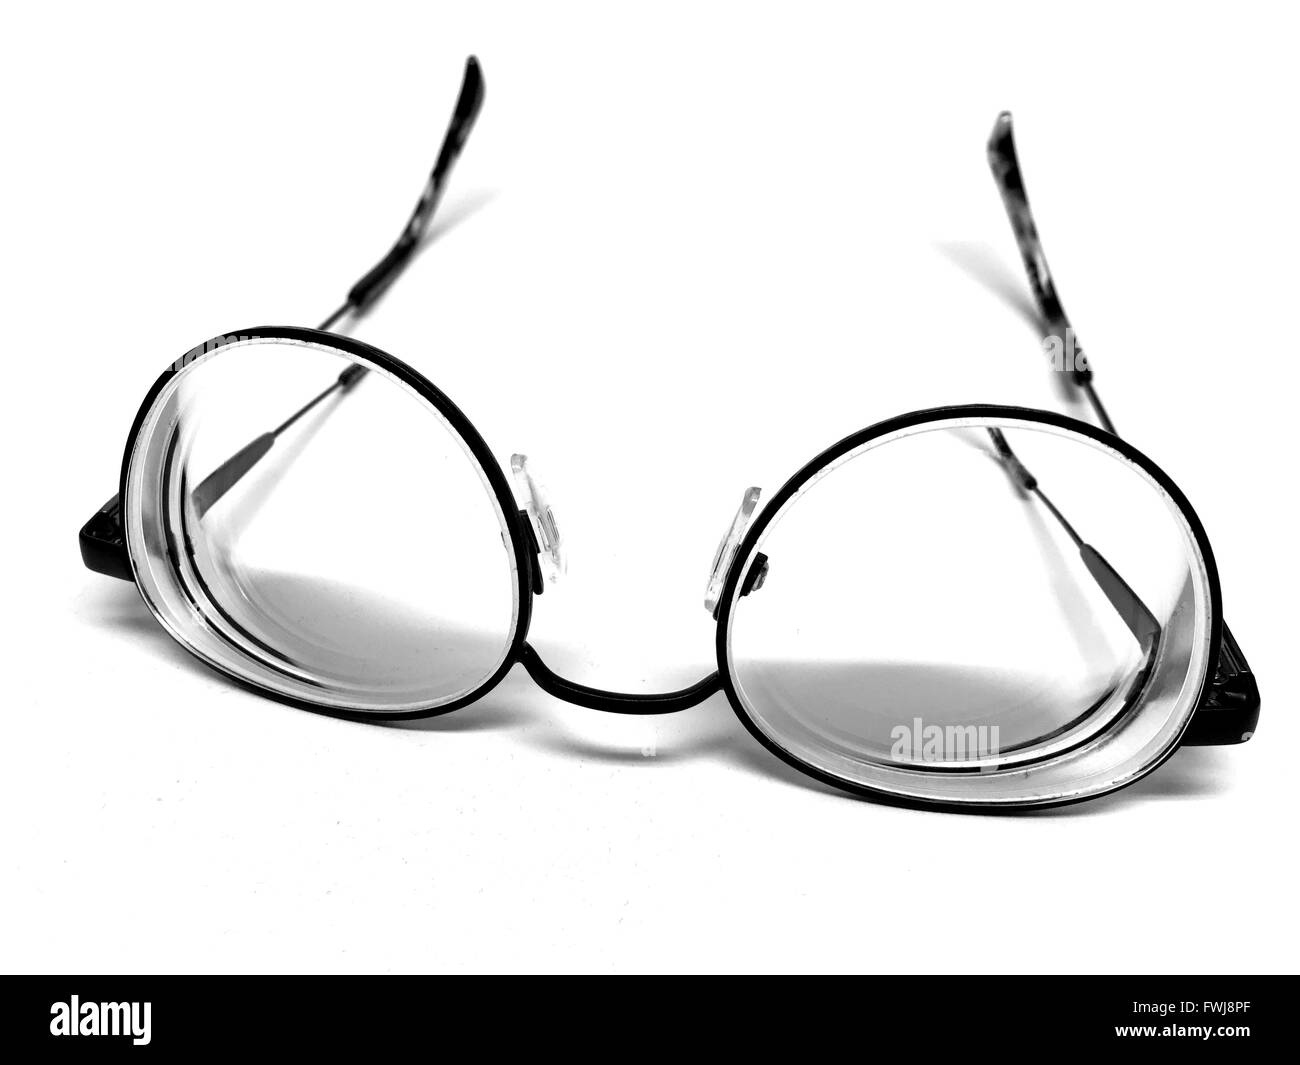 High Angle View Of Eye Glasses Against White Background Stock Photo